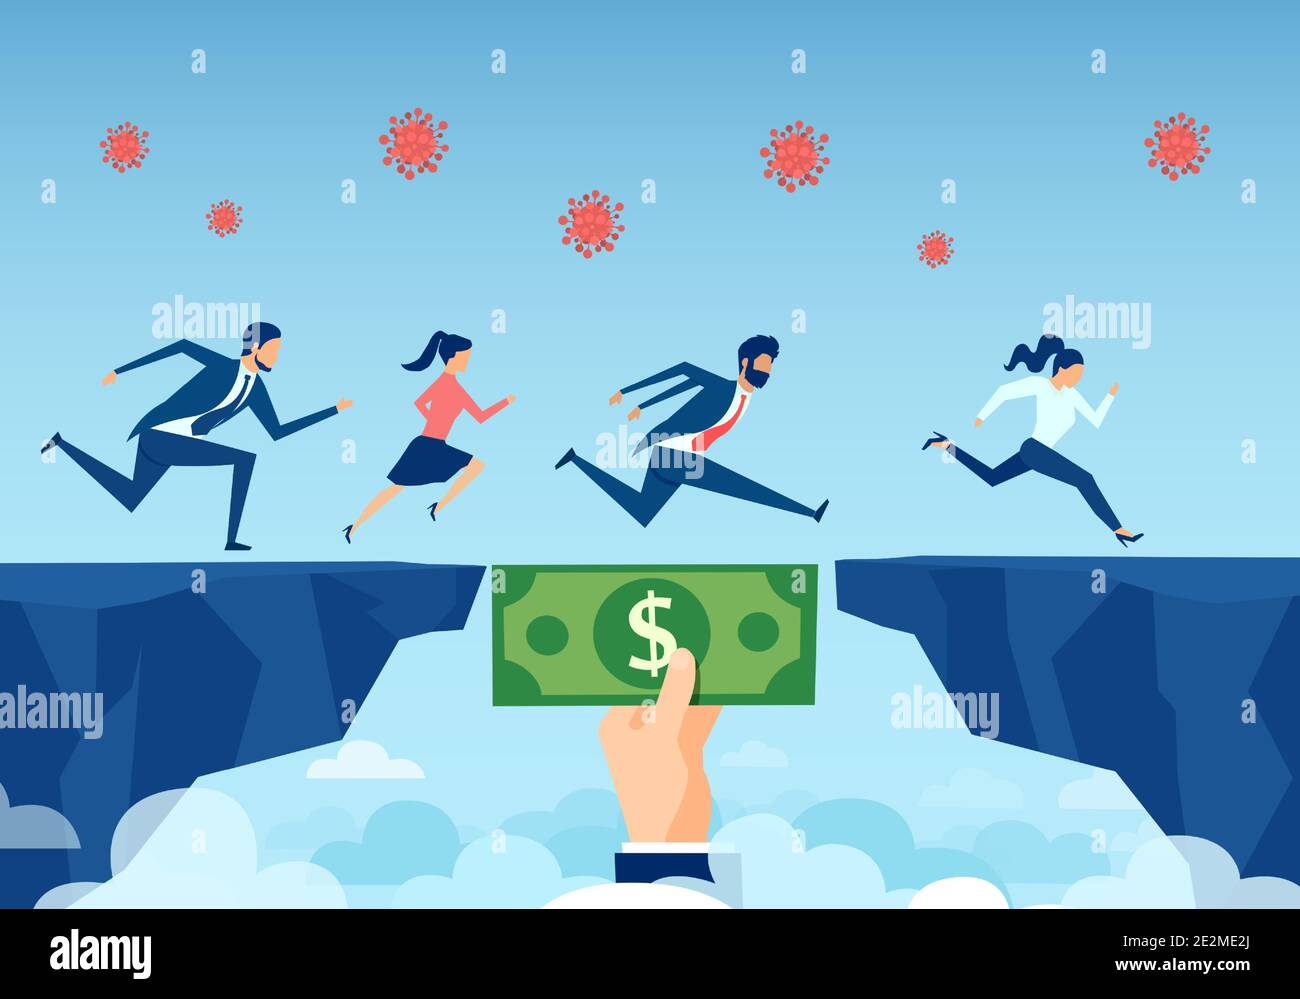 Vector of a helping hand with dollar bill bridging economy gap during coronavirus pandemic, assisting business people to overcome financial difficulti Stock Vector